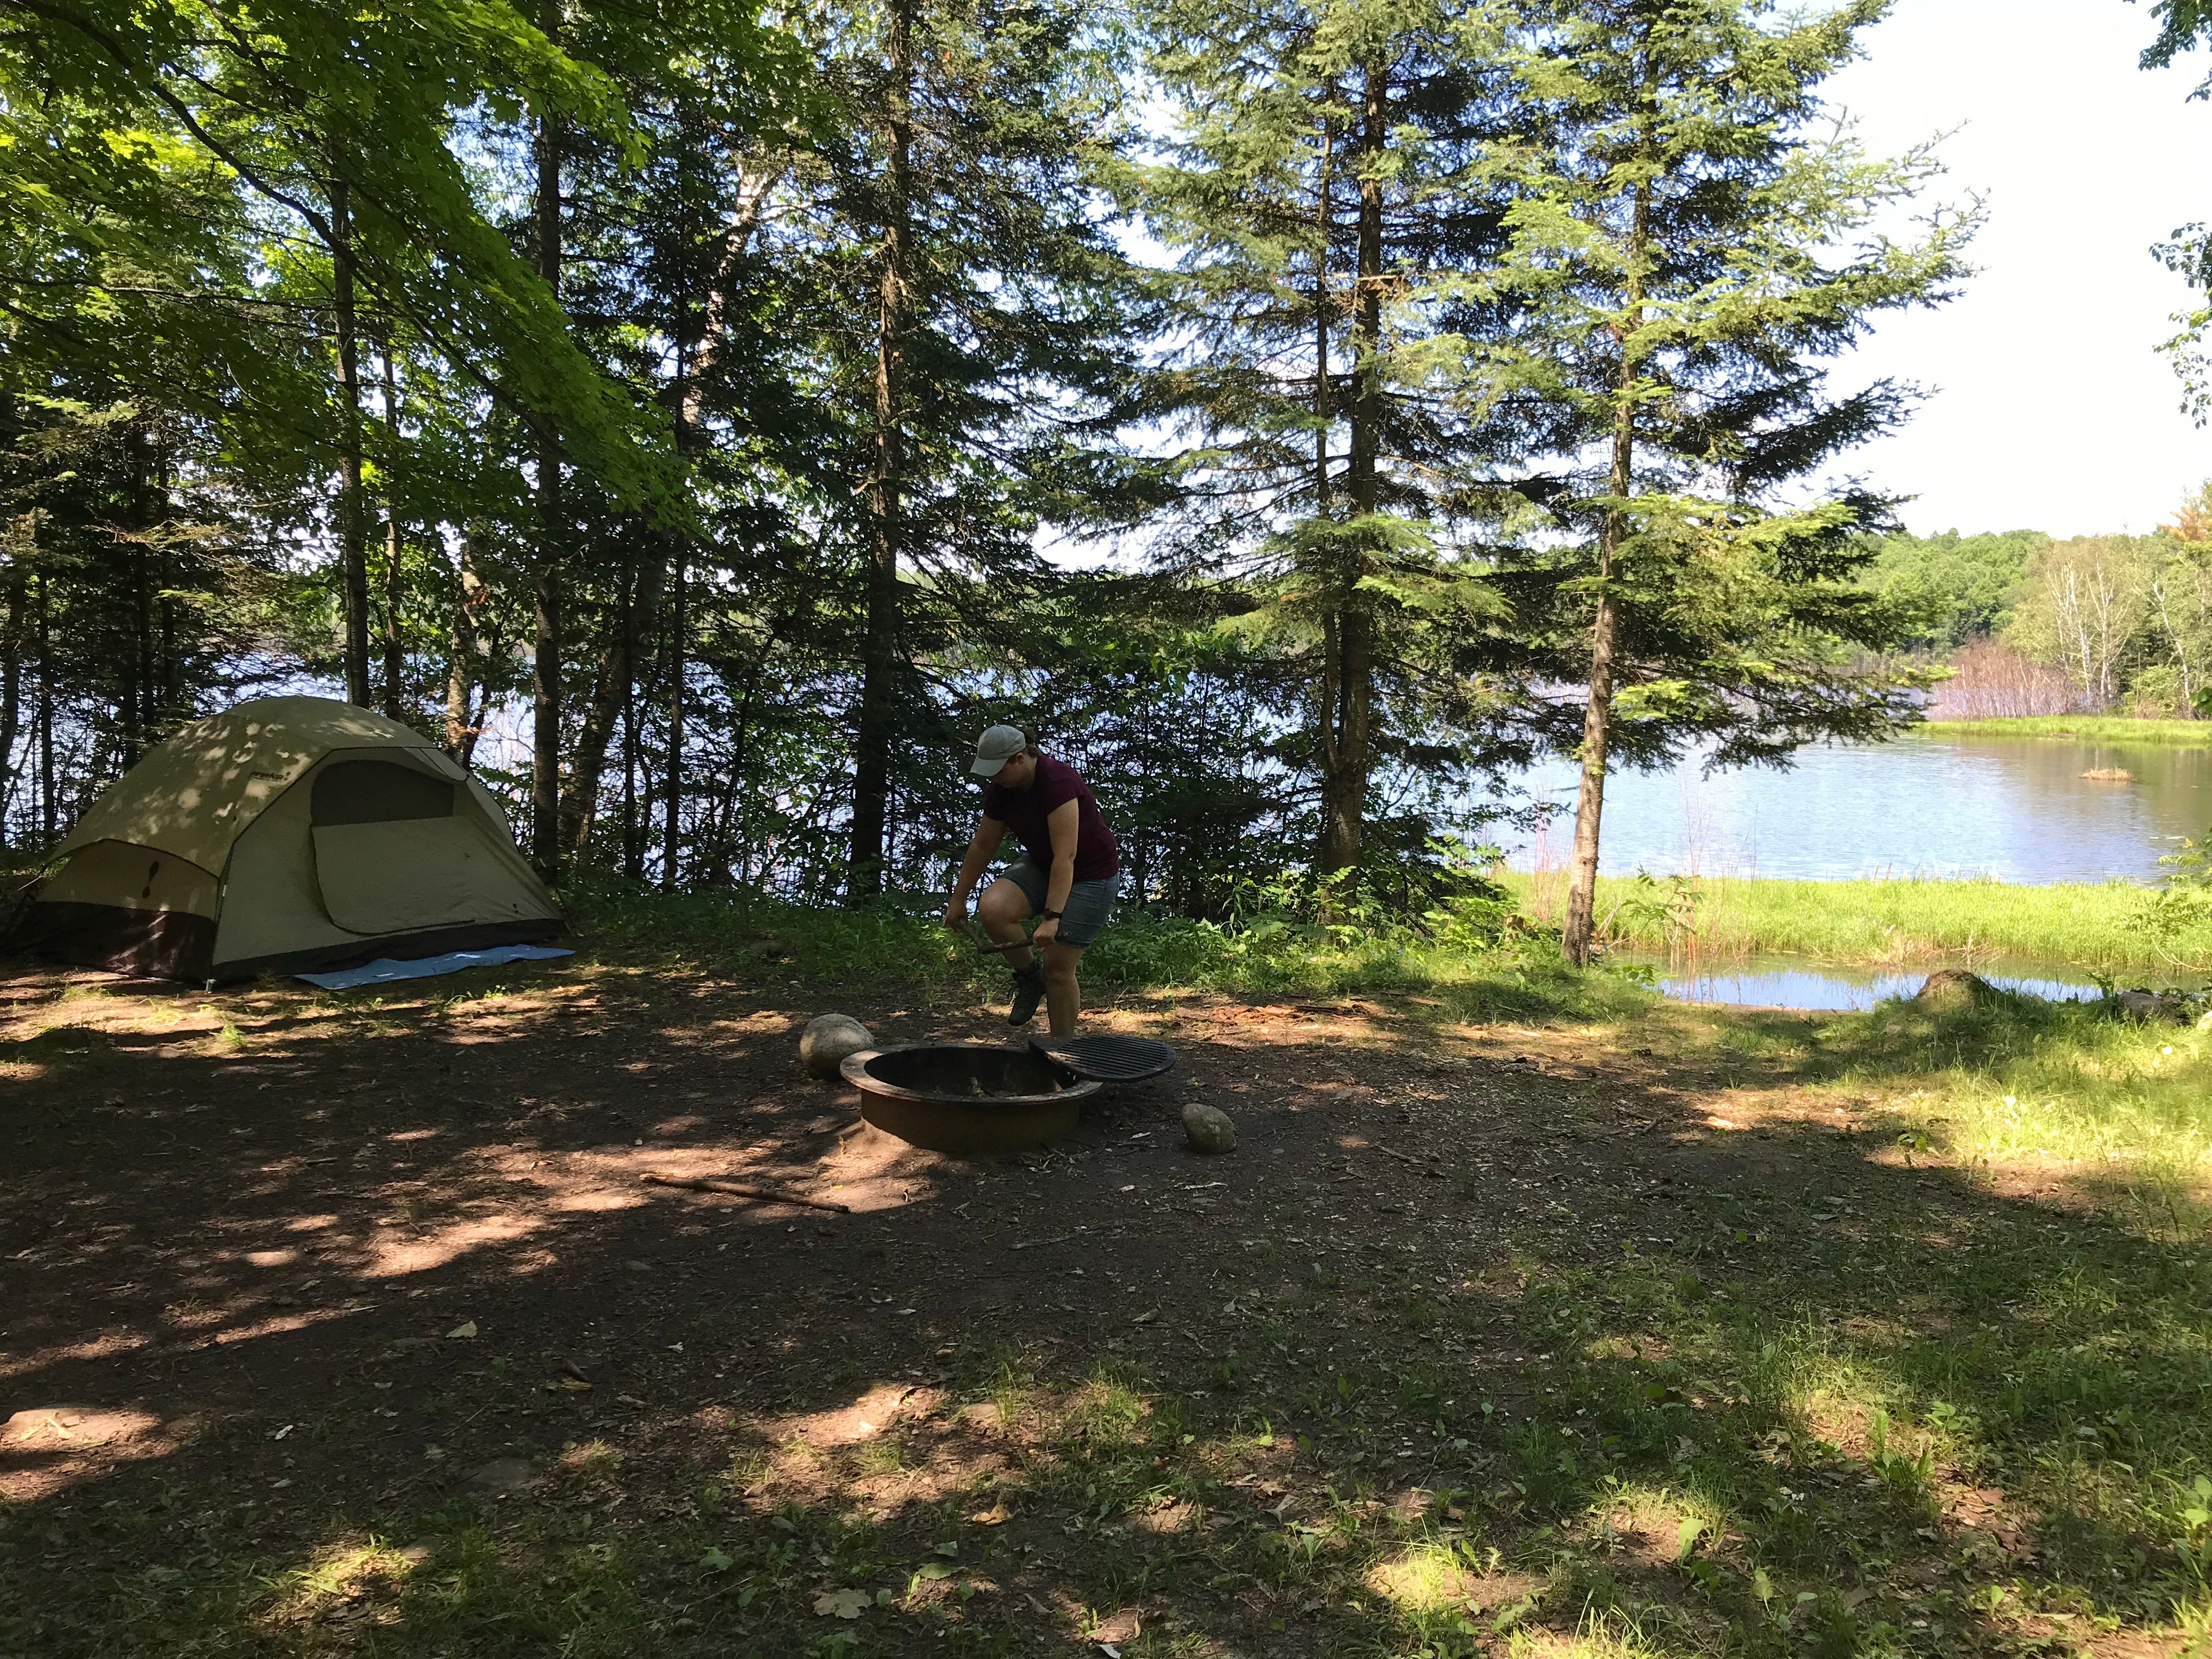 Camper submitted image from Chequamegon National Forest Perch Lake Campground - 5